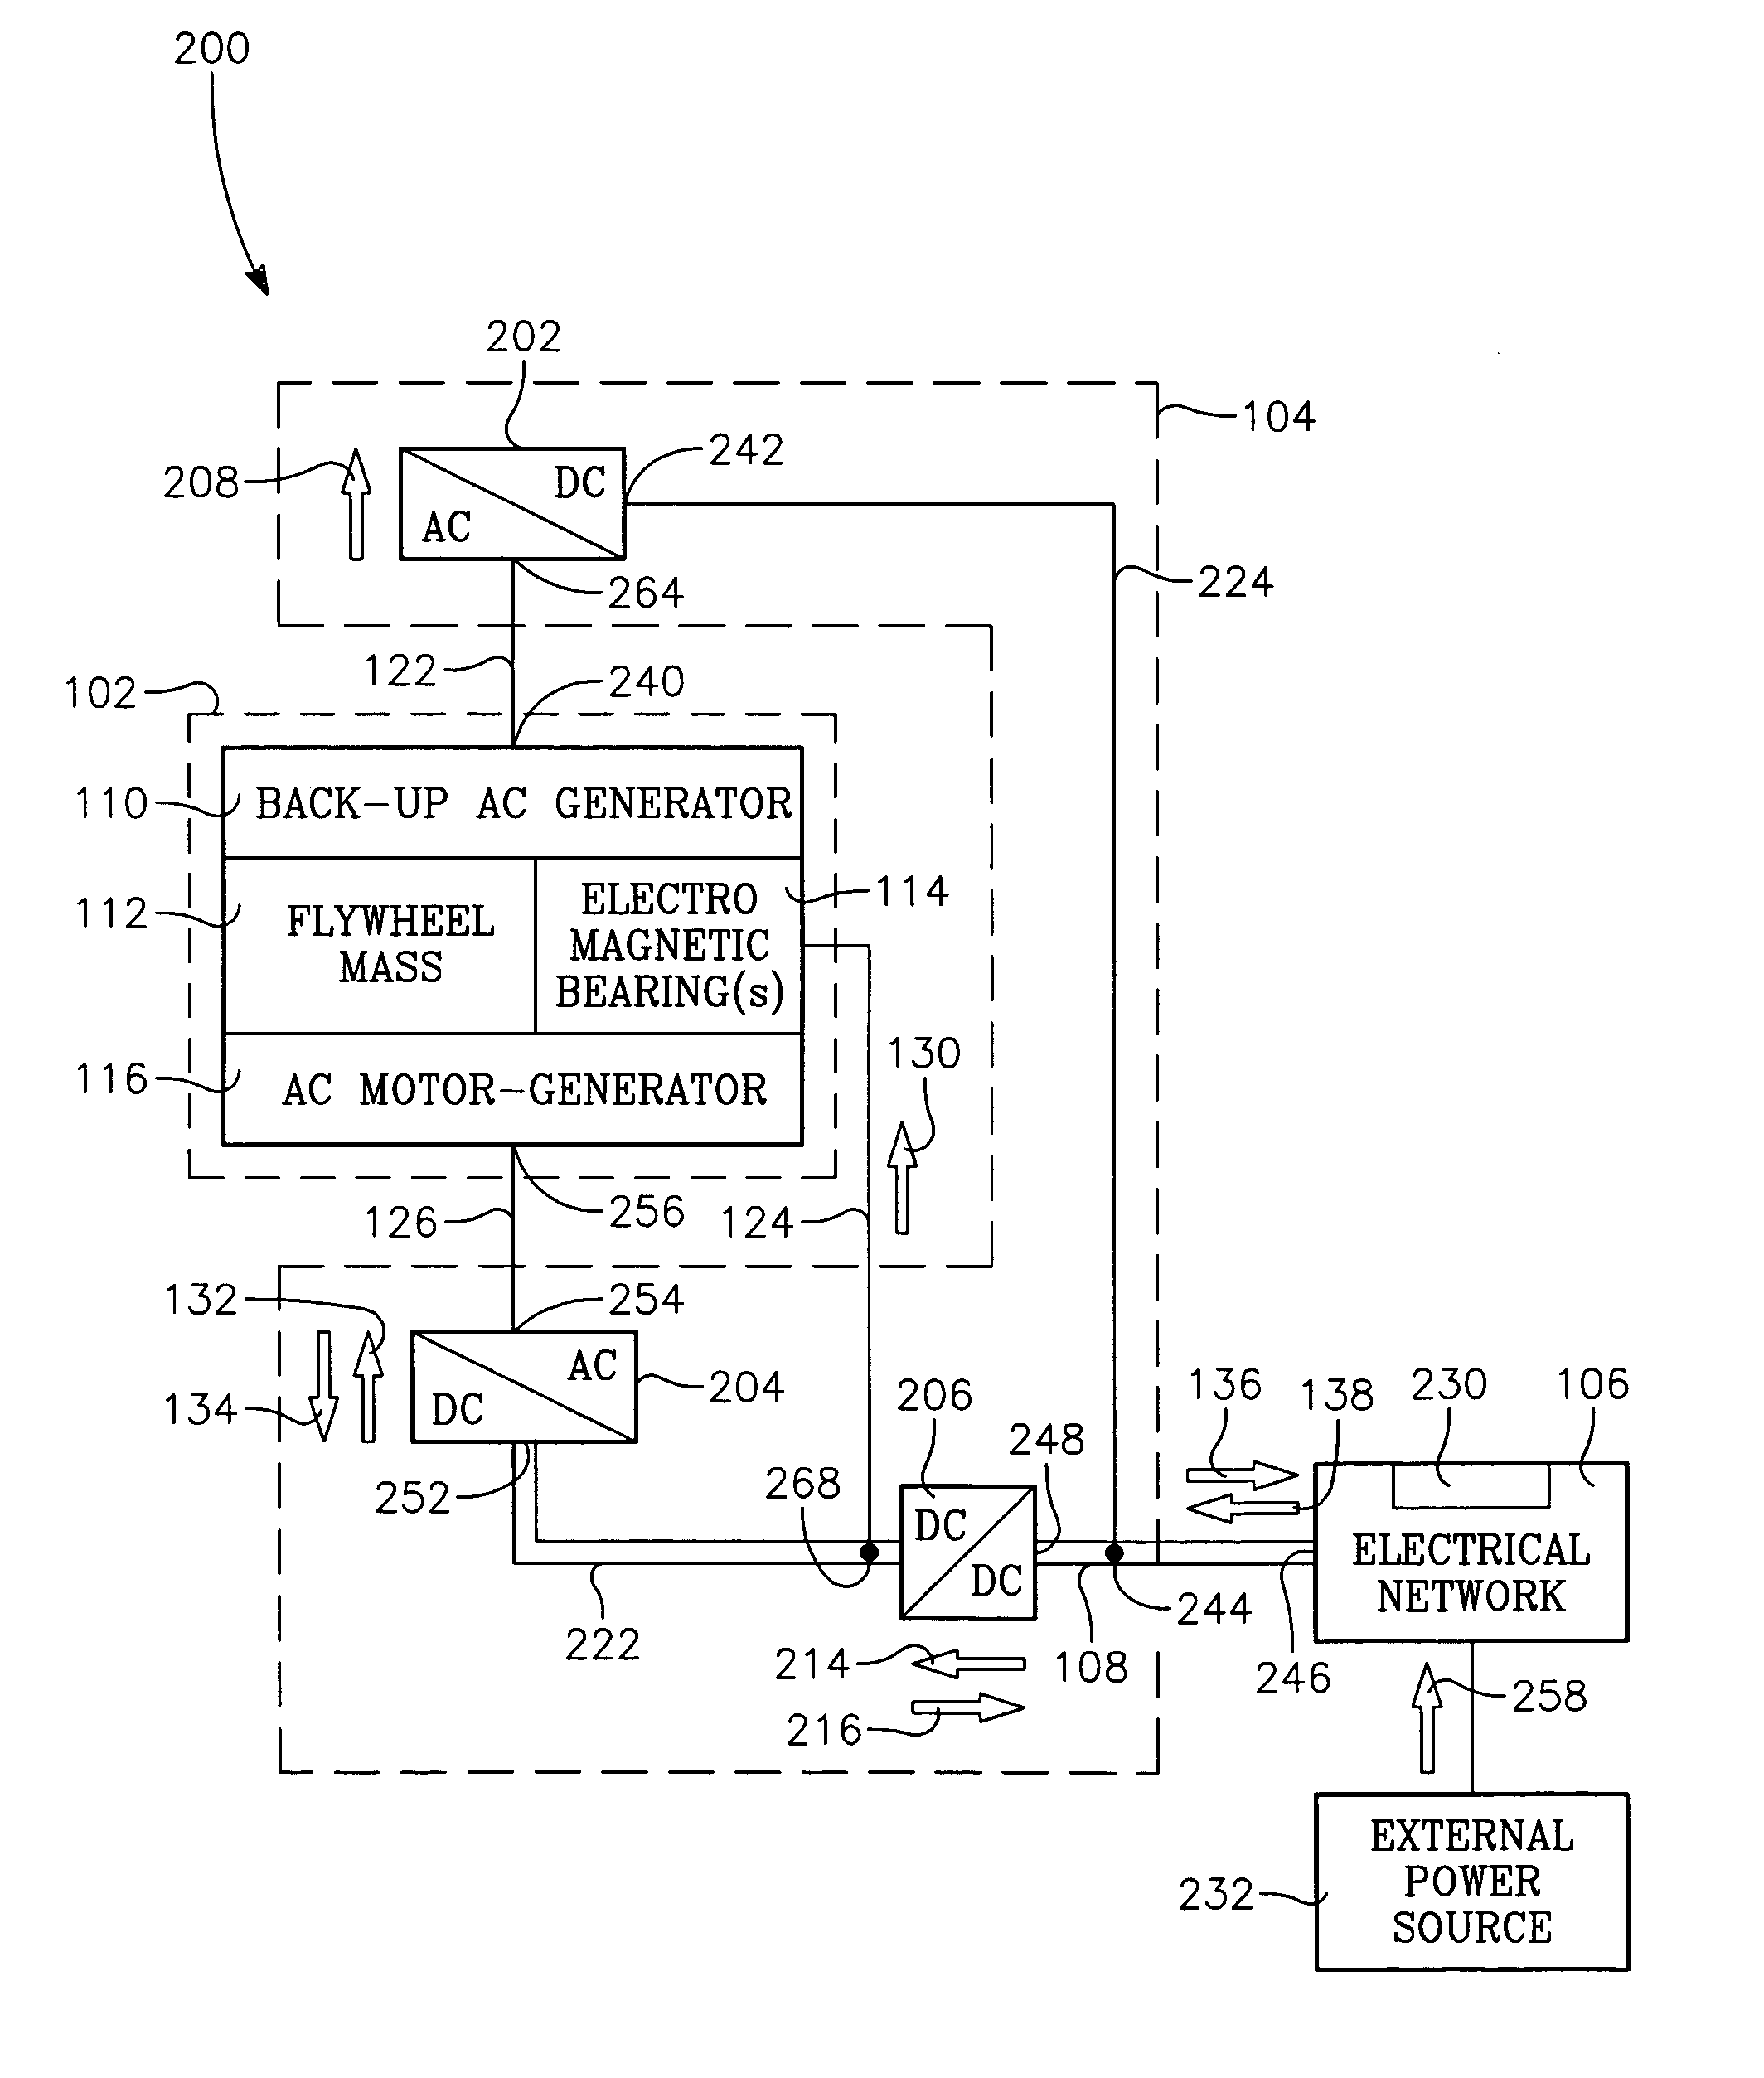 Flywheel system with synchronous reluctance and permanent magnet generators